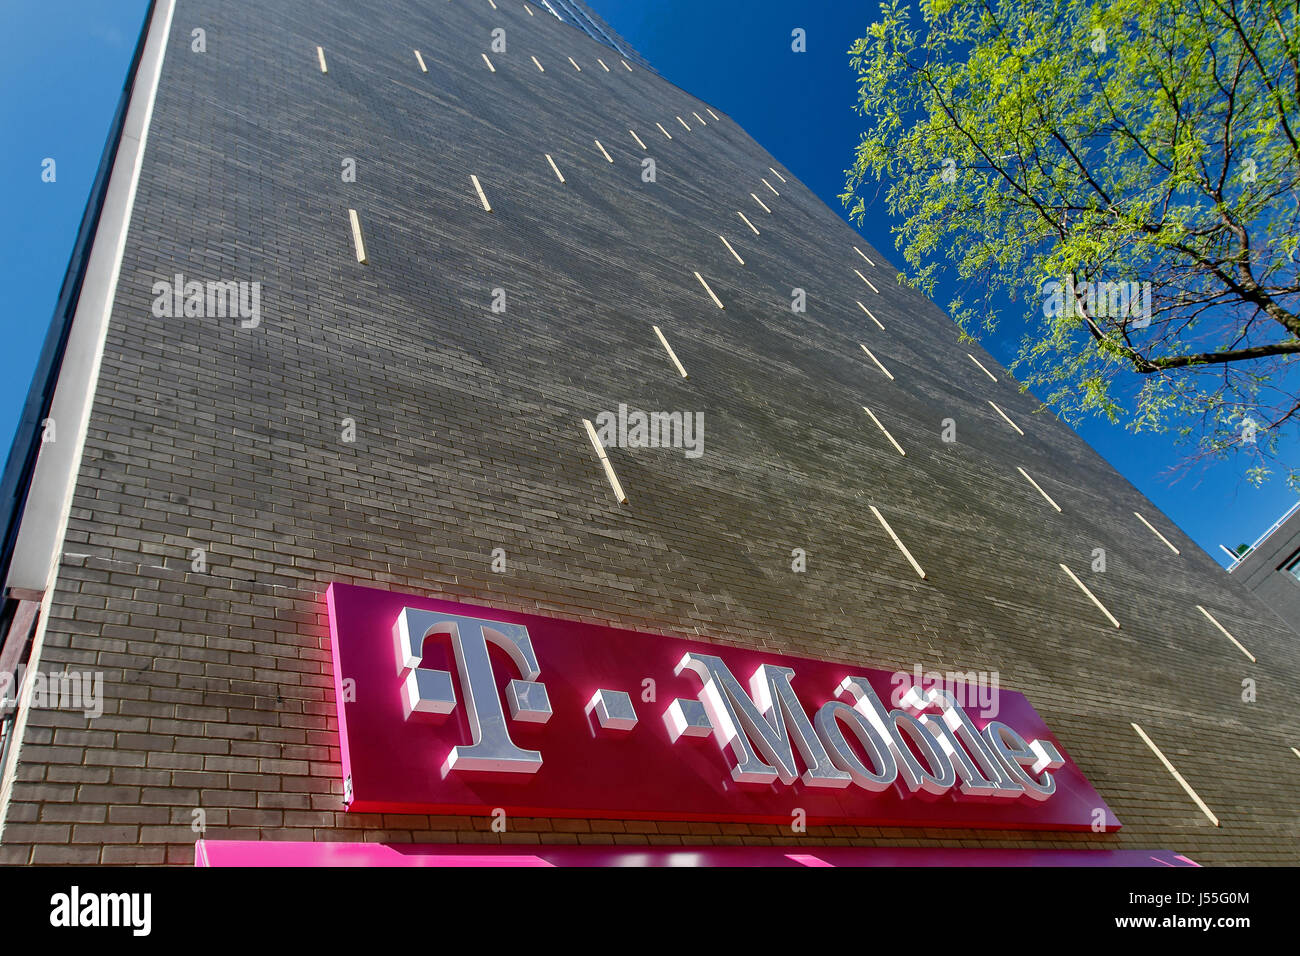 New York, May 08, 2017: Exterior sign on a wall over a T-Mobile retail store in Manhattan. Stock Photo